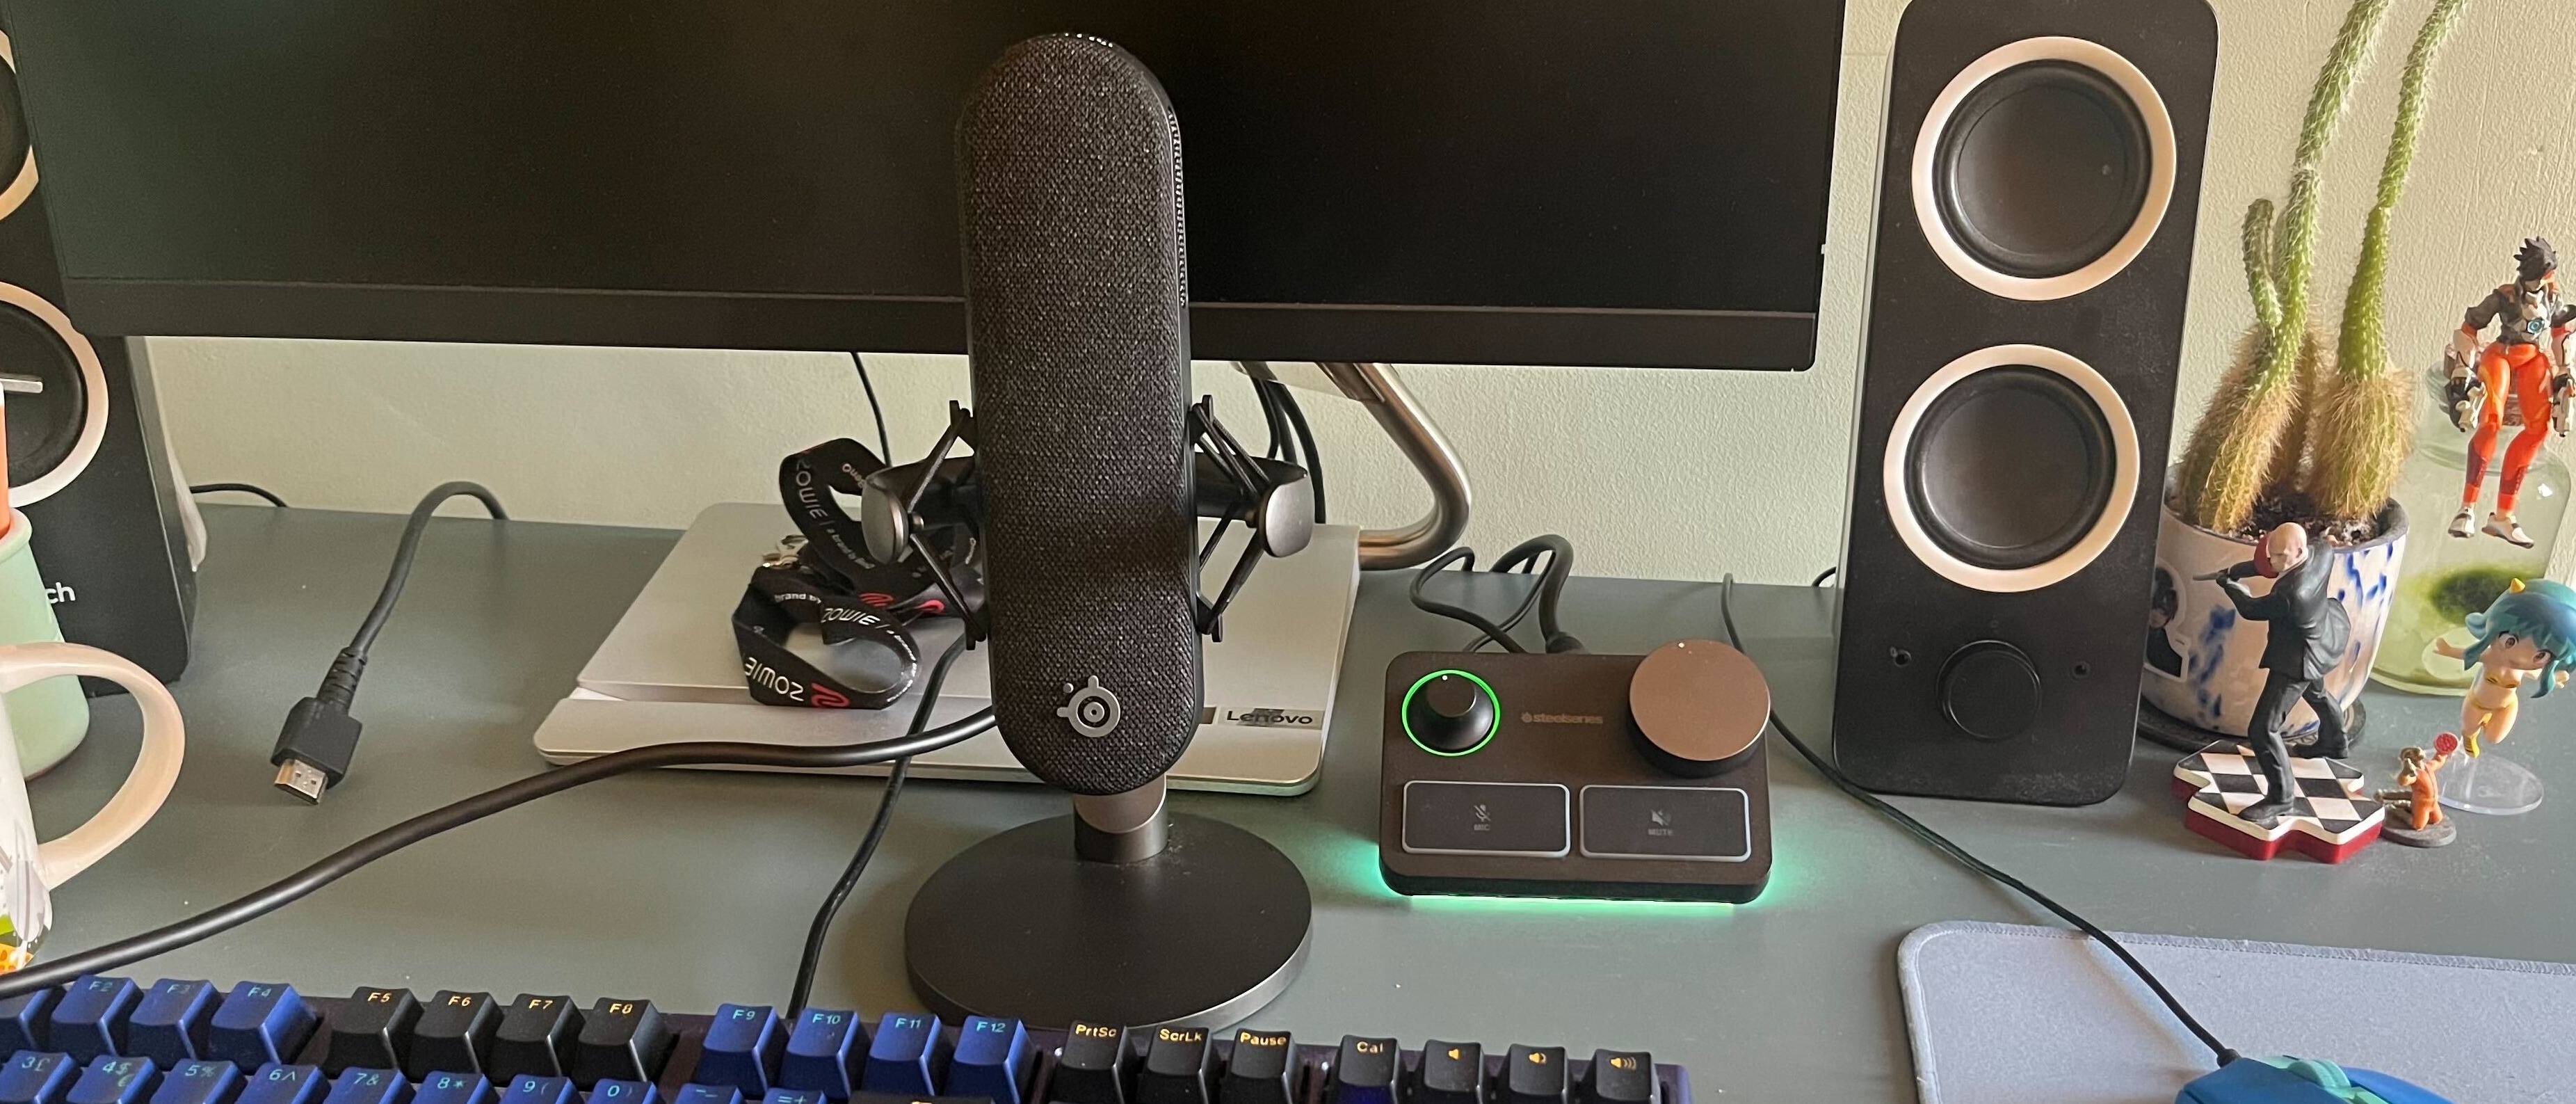 SteelSeries Alias review: Noble USB microphone with powerful sound